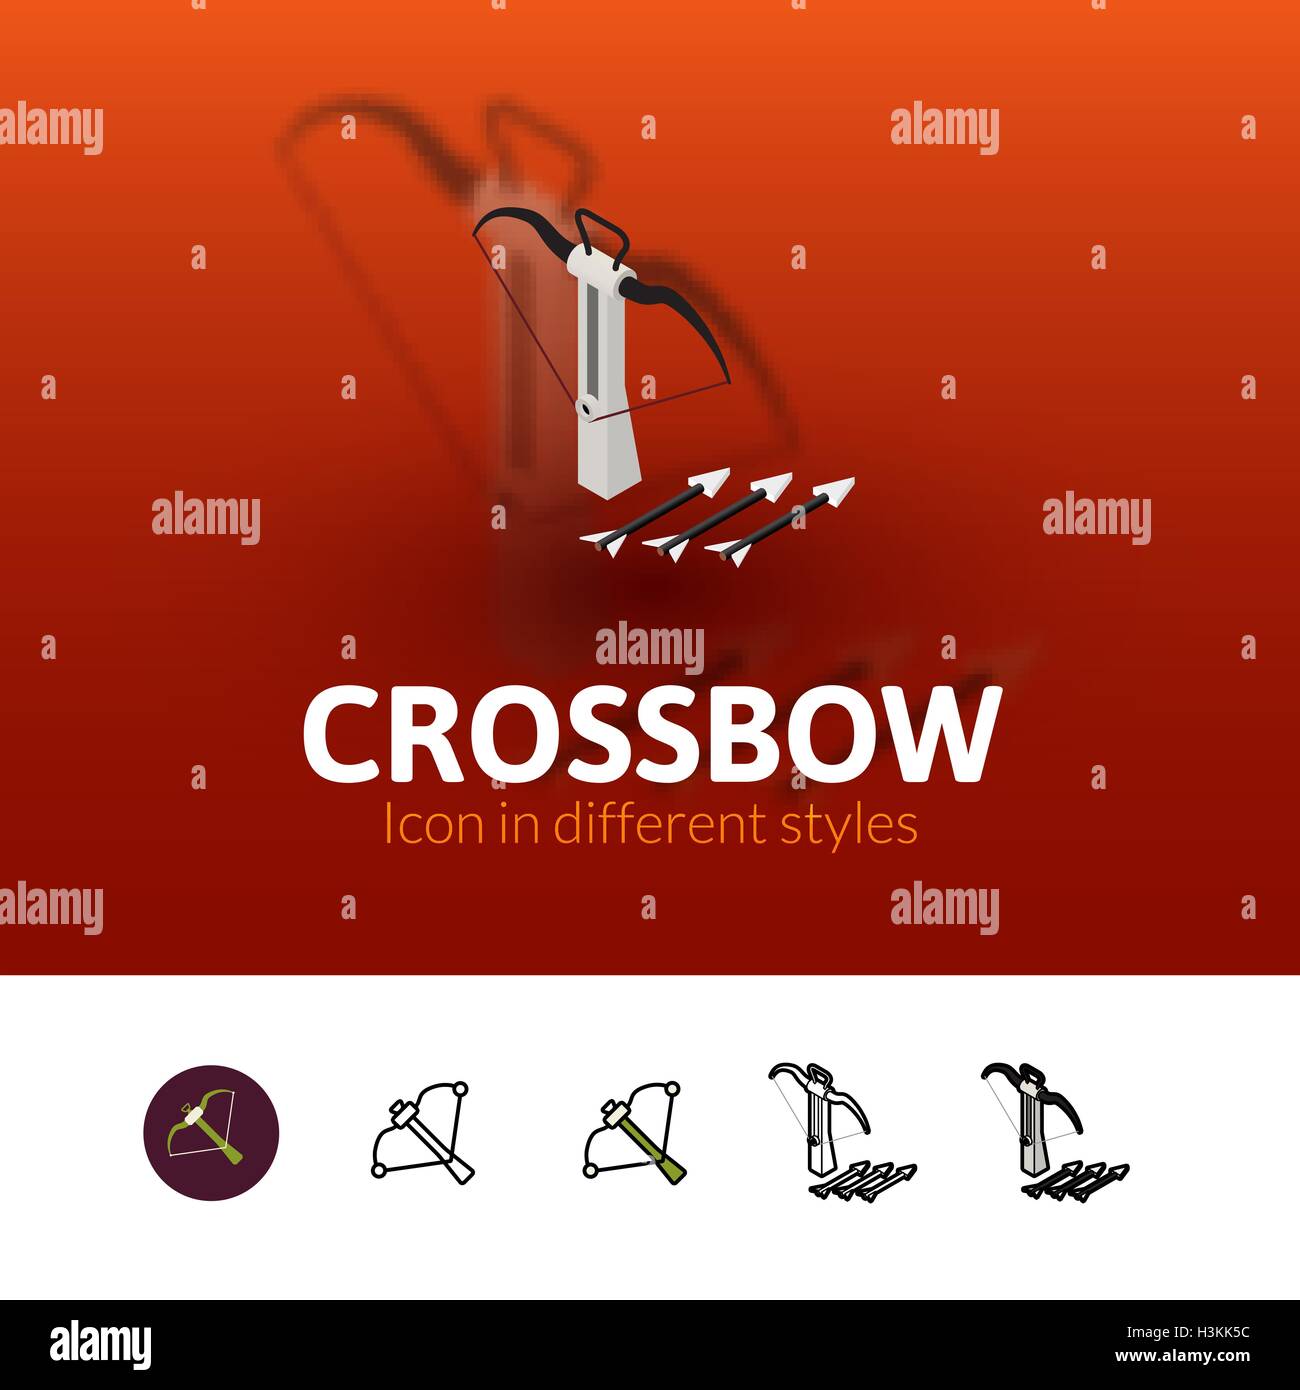 Crossbow icon in different style Stock Vector